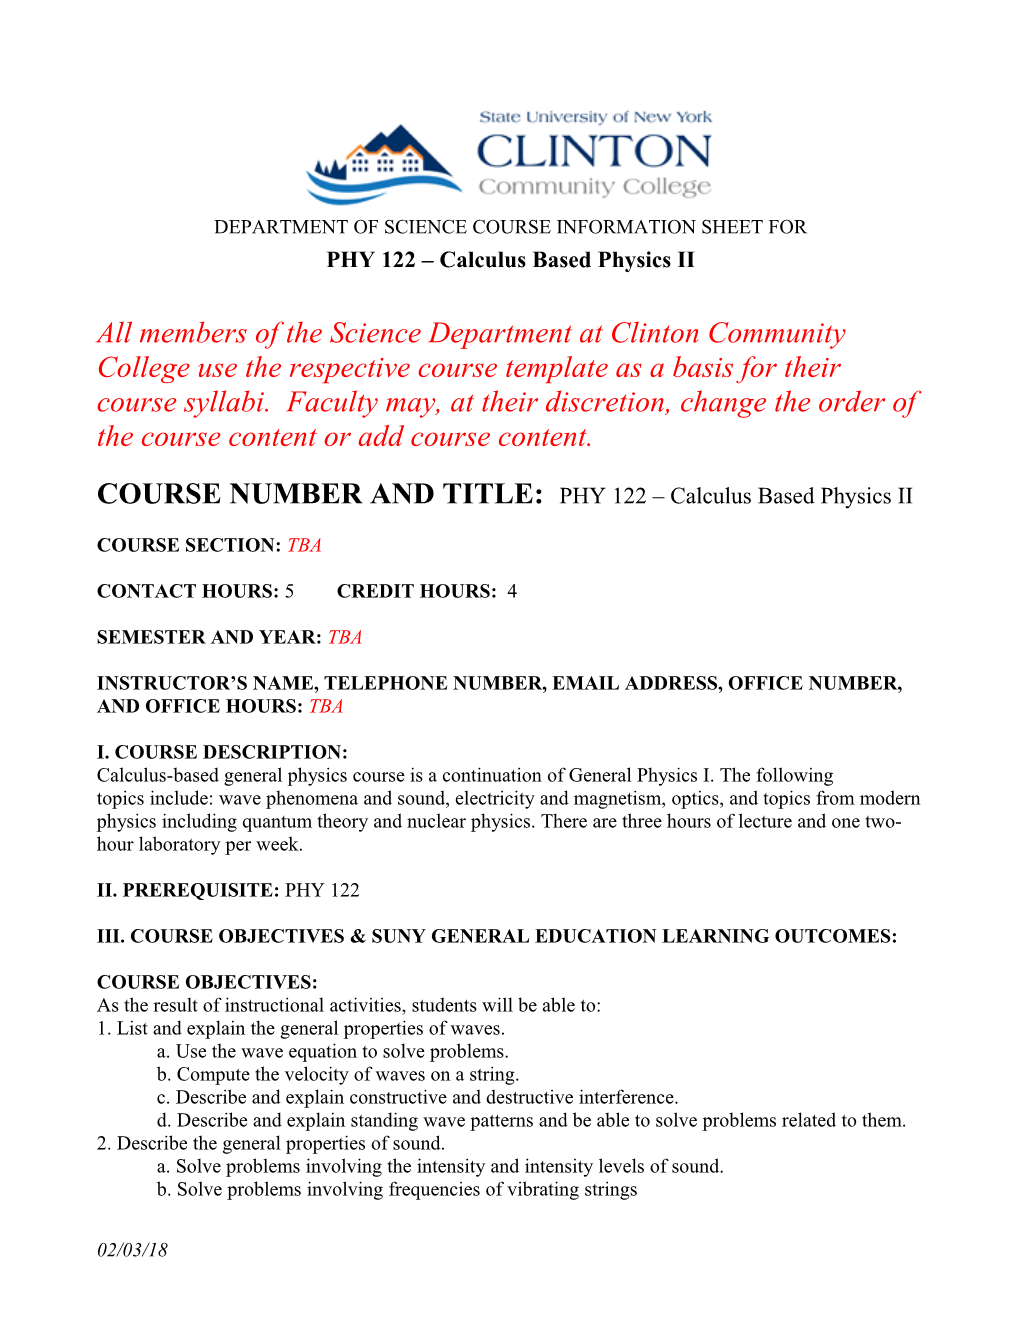 Department of Sciencecourse Information Sheet For